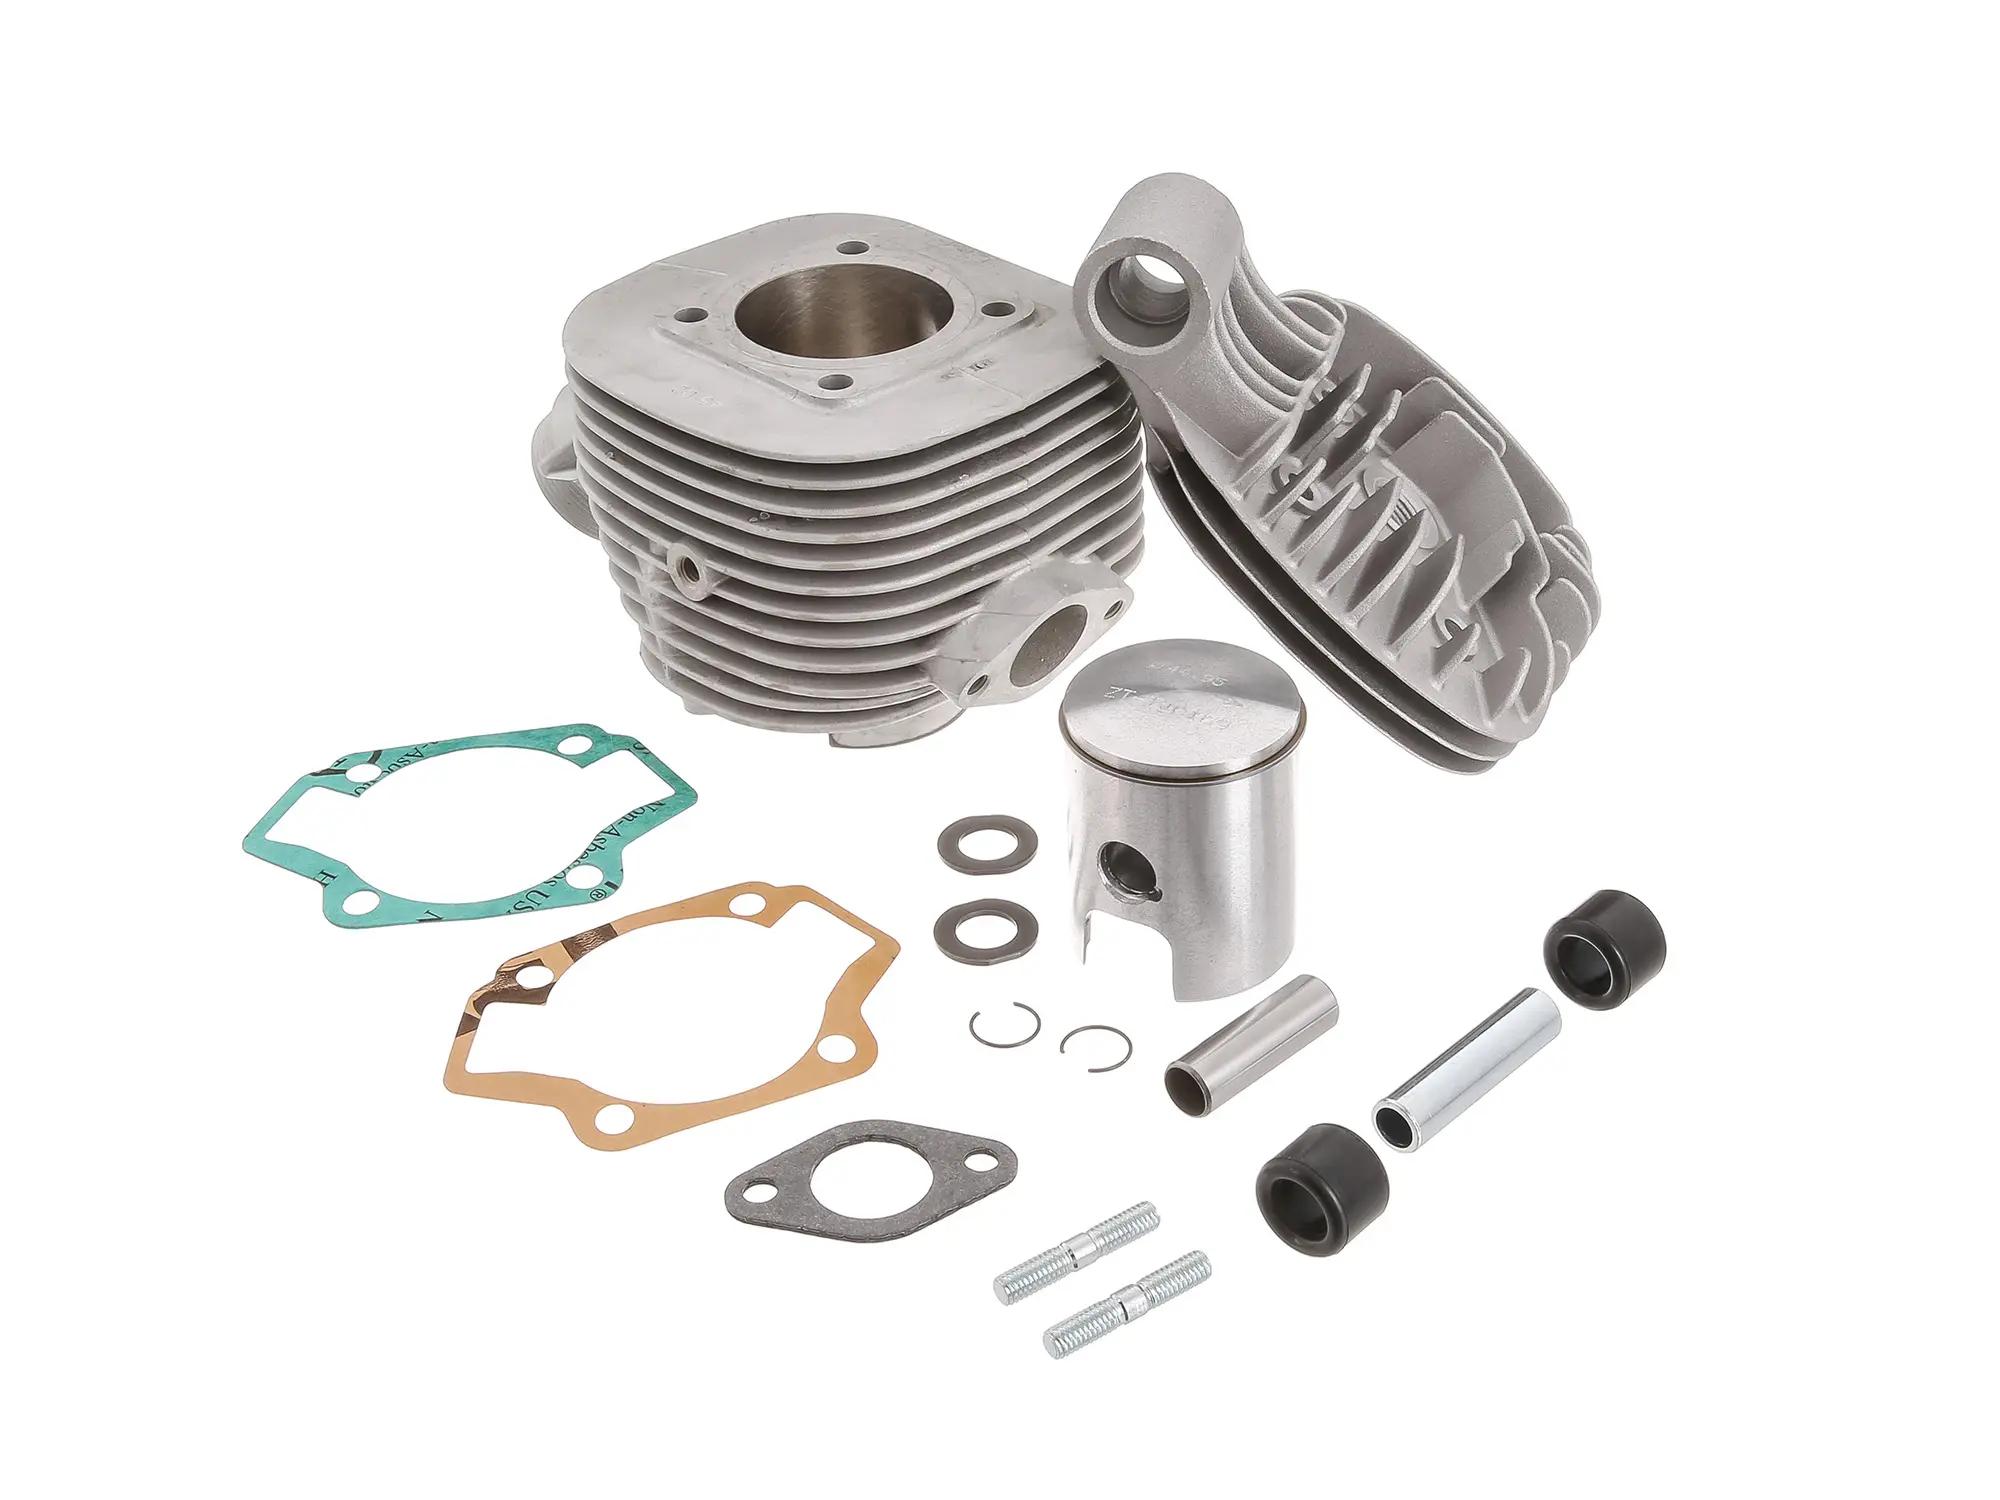 Tuning cylinder kit ZT63N Stage 2 (63ccm) - for Simson KR51/1